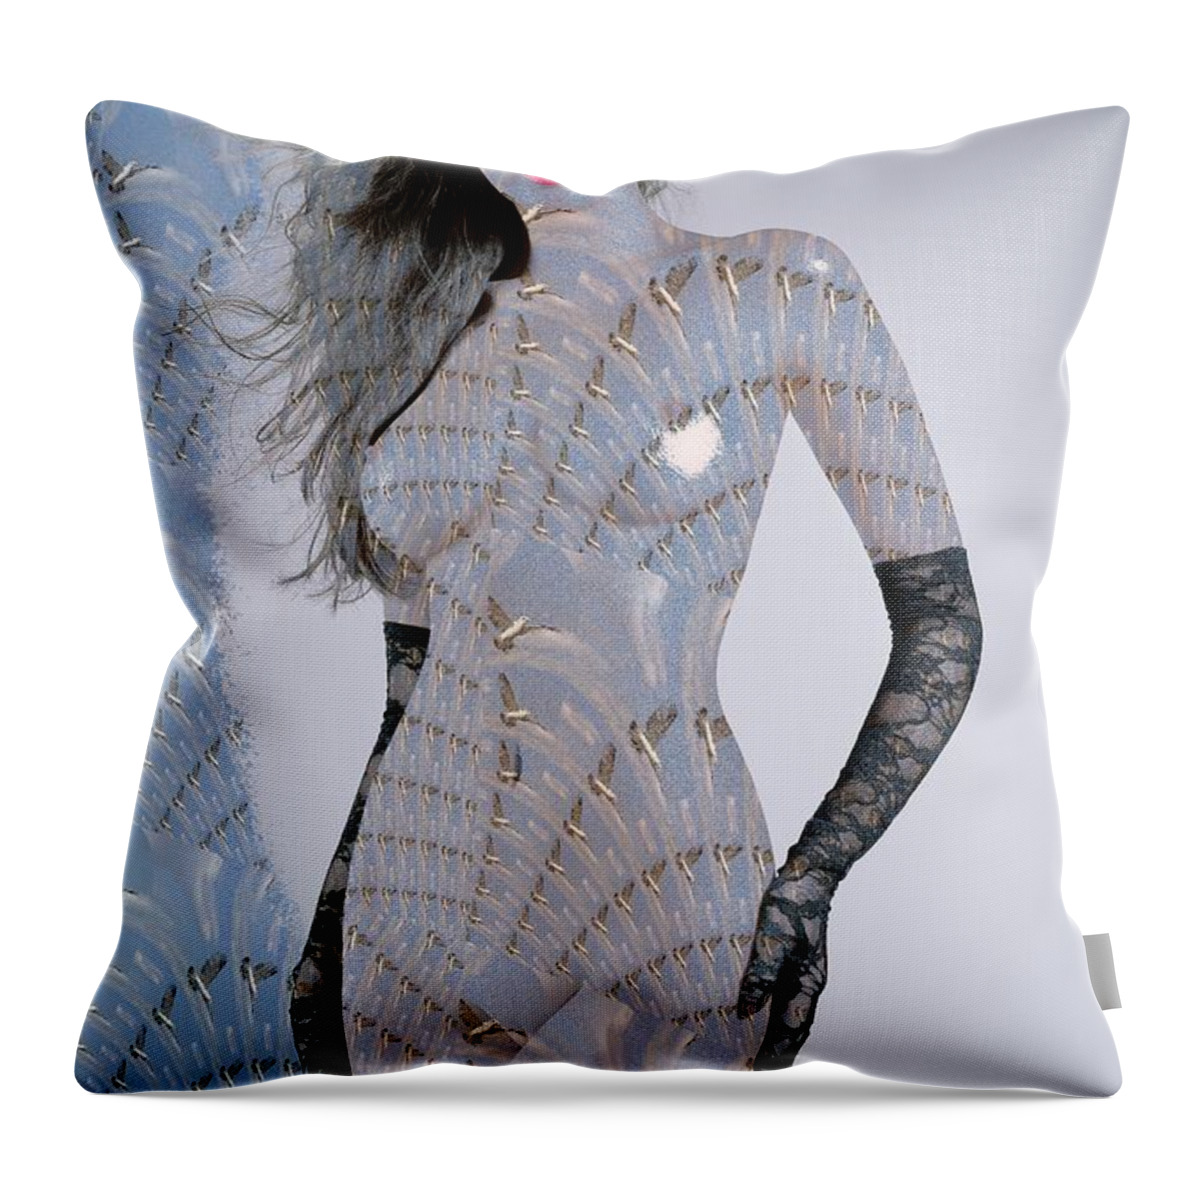 Fractal Throw Pillow featuring the mixed media Black Gravity Seagull by Stephane Poirier